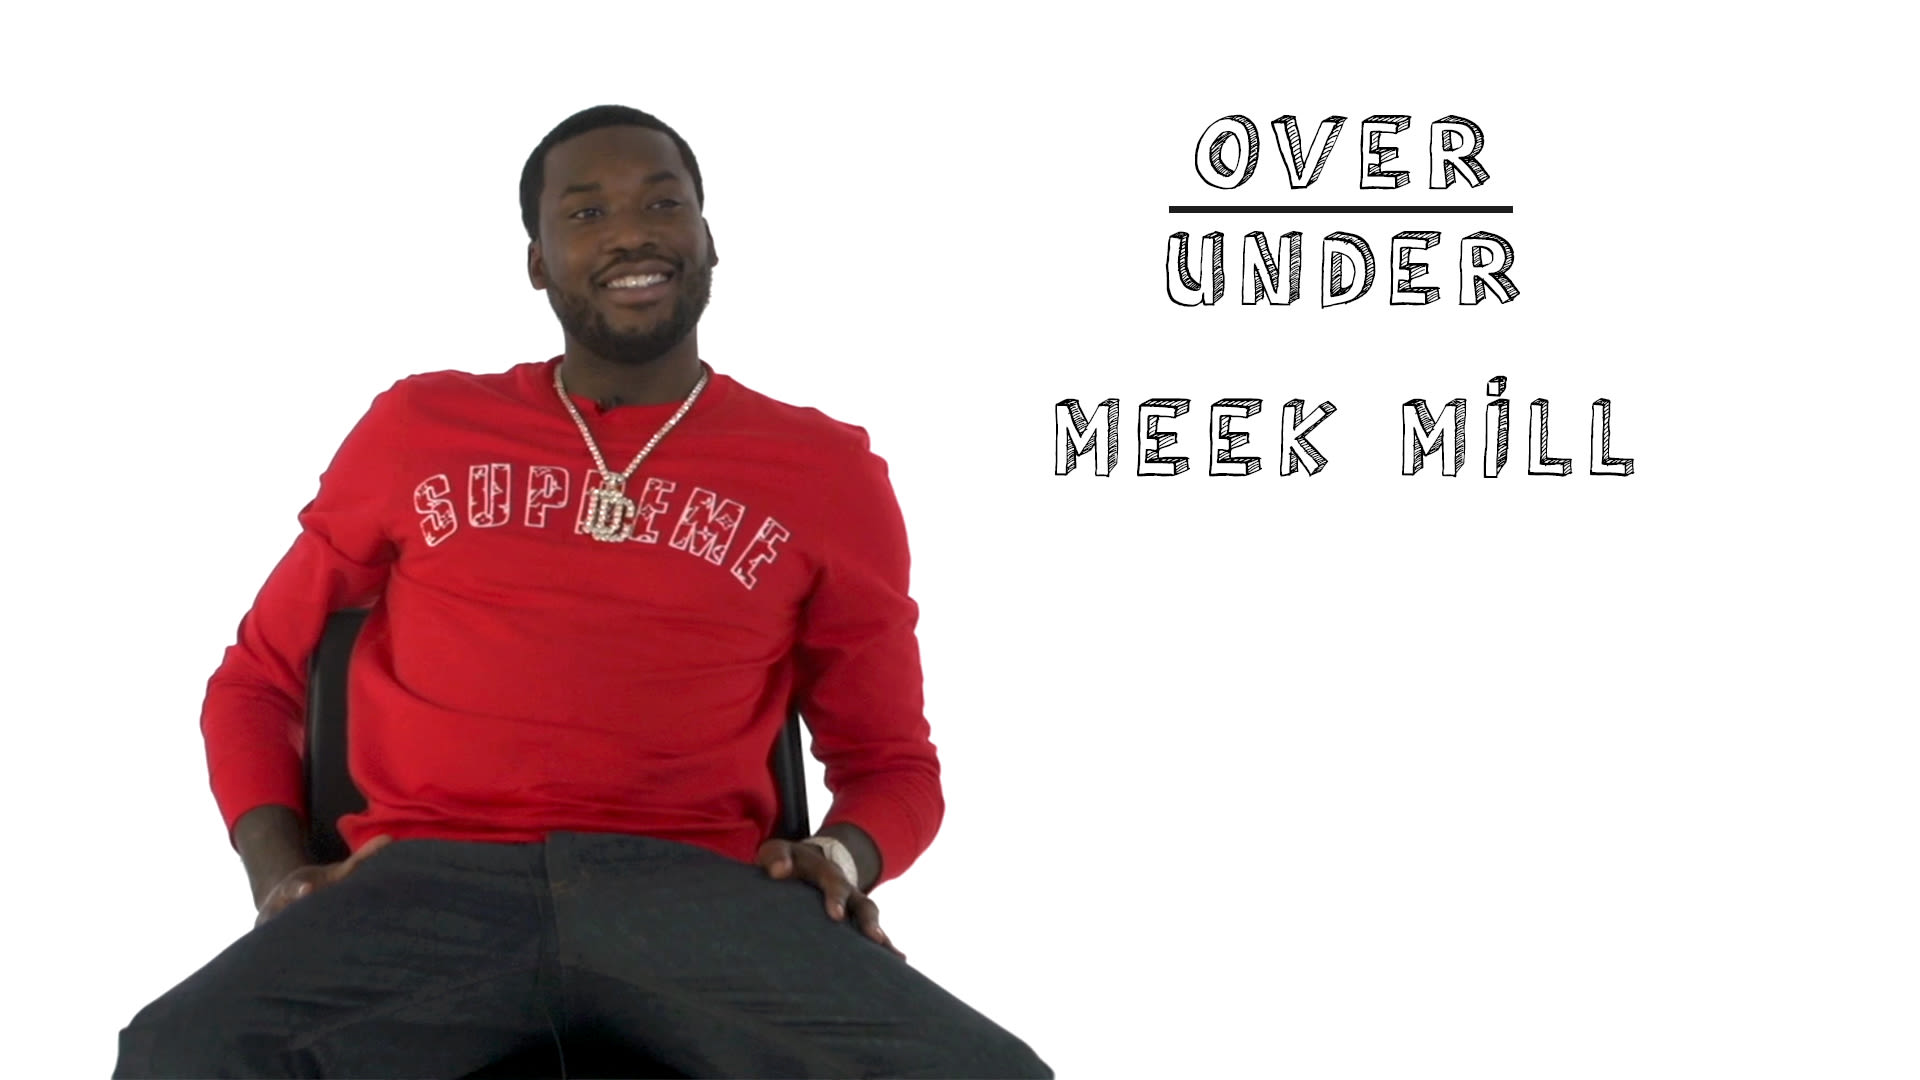 Drunk Sex Orgies Worshiping Satan - Watch Meek Mill Rates Allen Iverson, Cruises, and Lean Popsicles |  Over/Under | Pitchfork